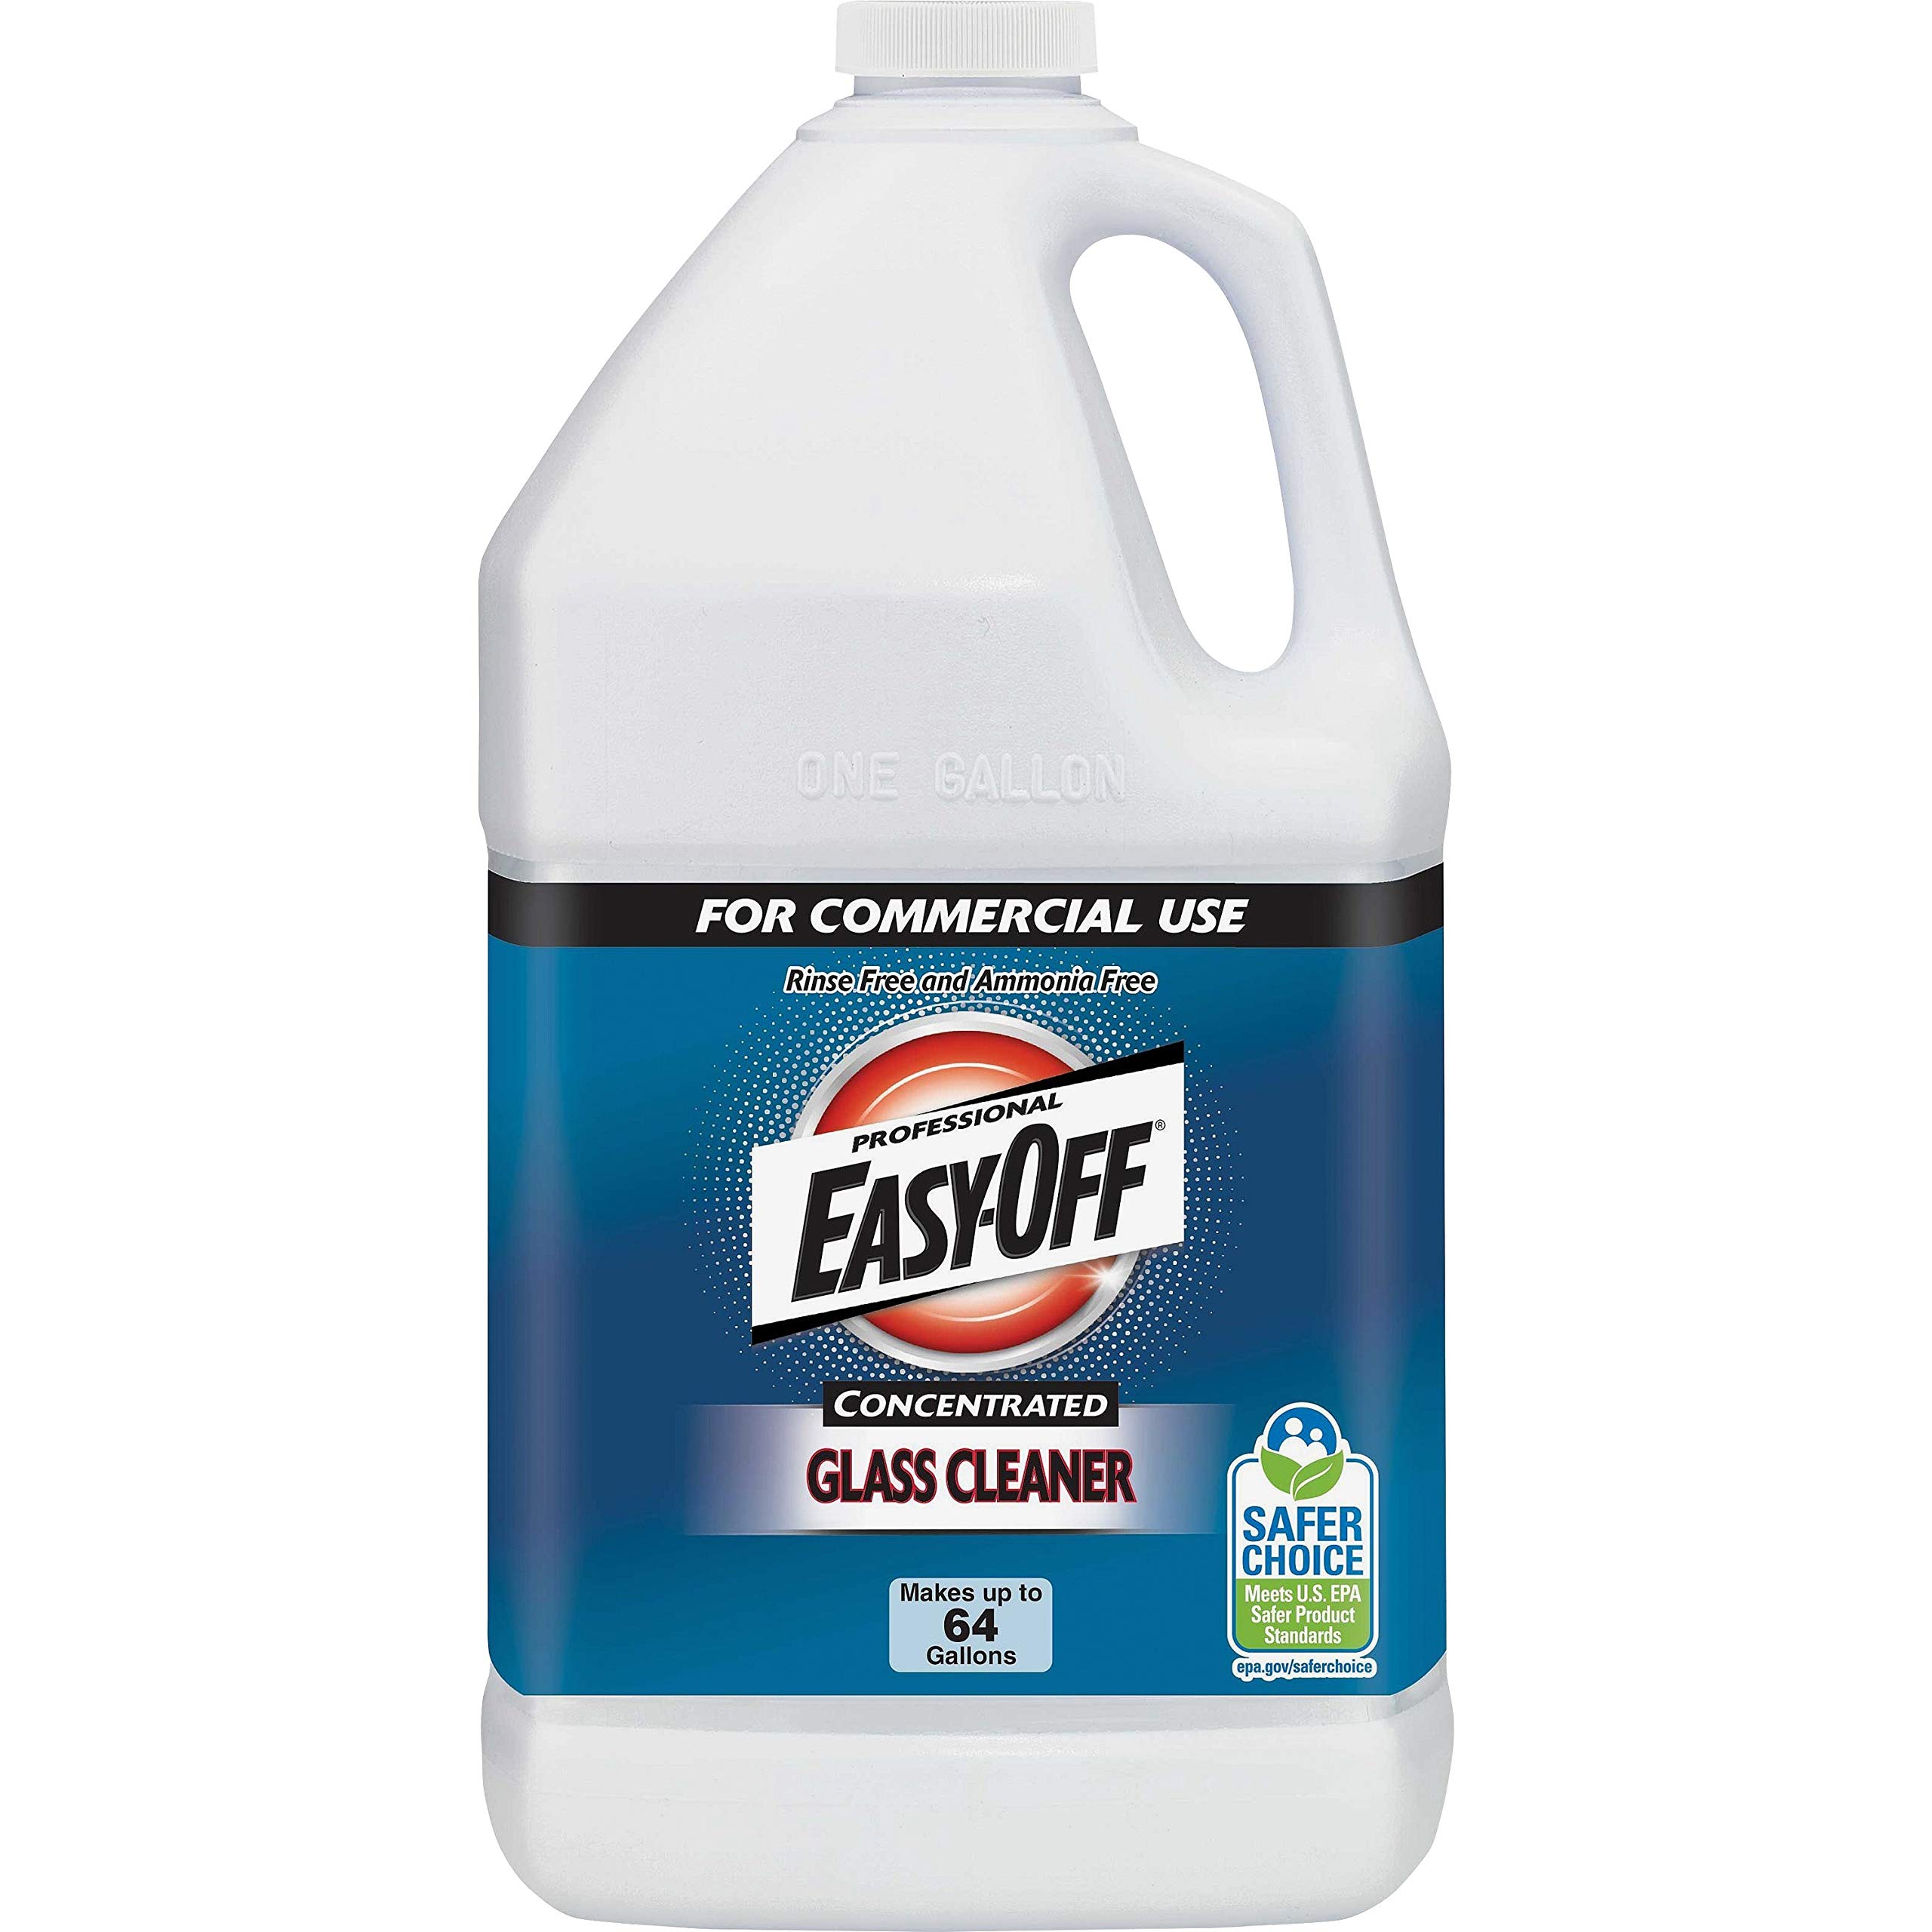 Professional EASY-OFF 89772CT Glass Cleaner Concentrate, 1 Gallon Bottle (Case of 2)